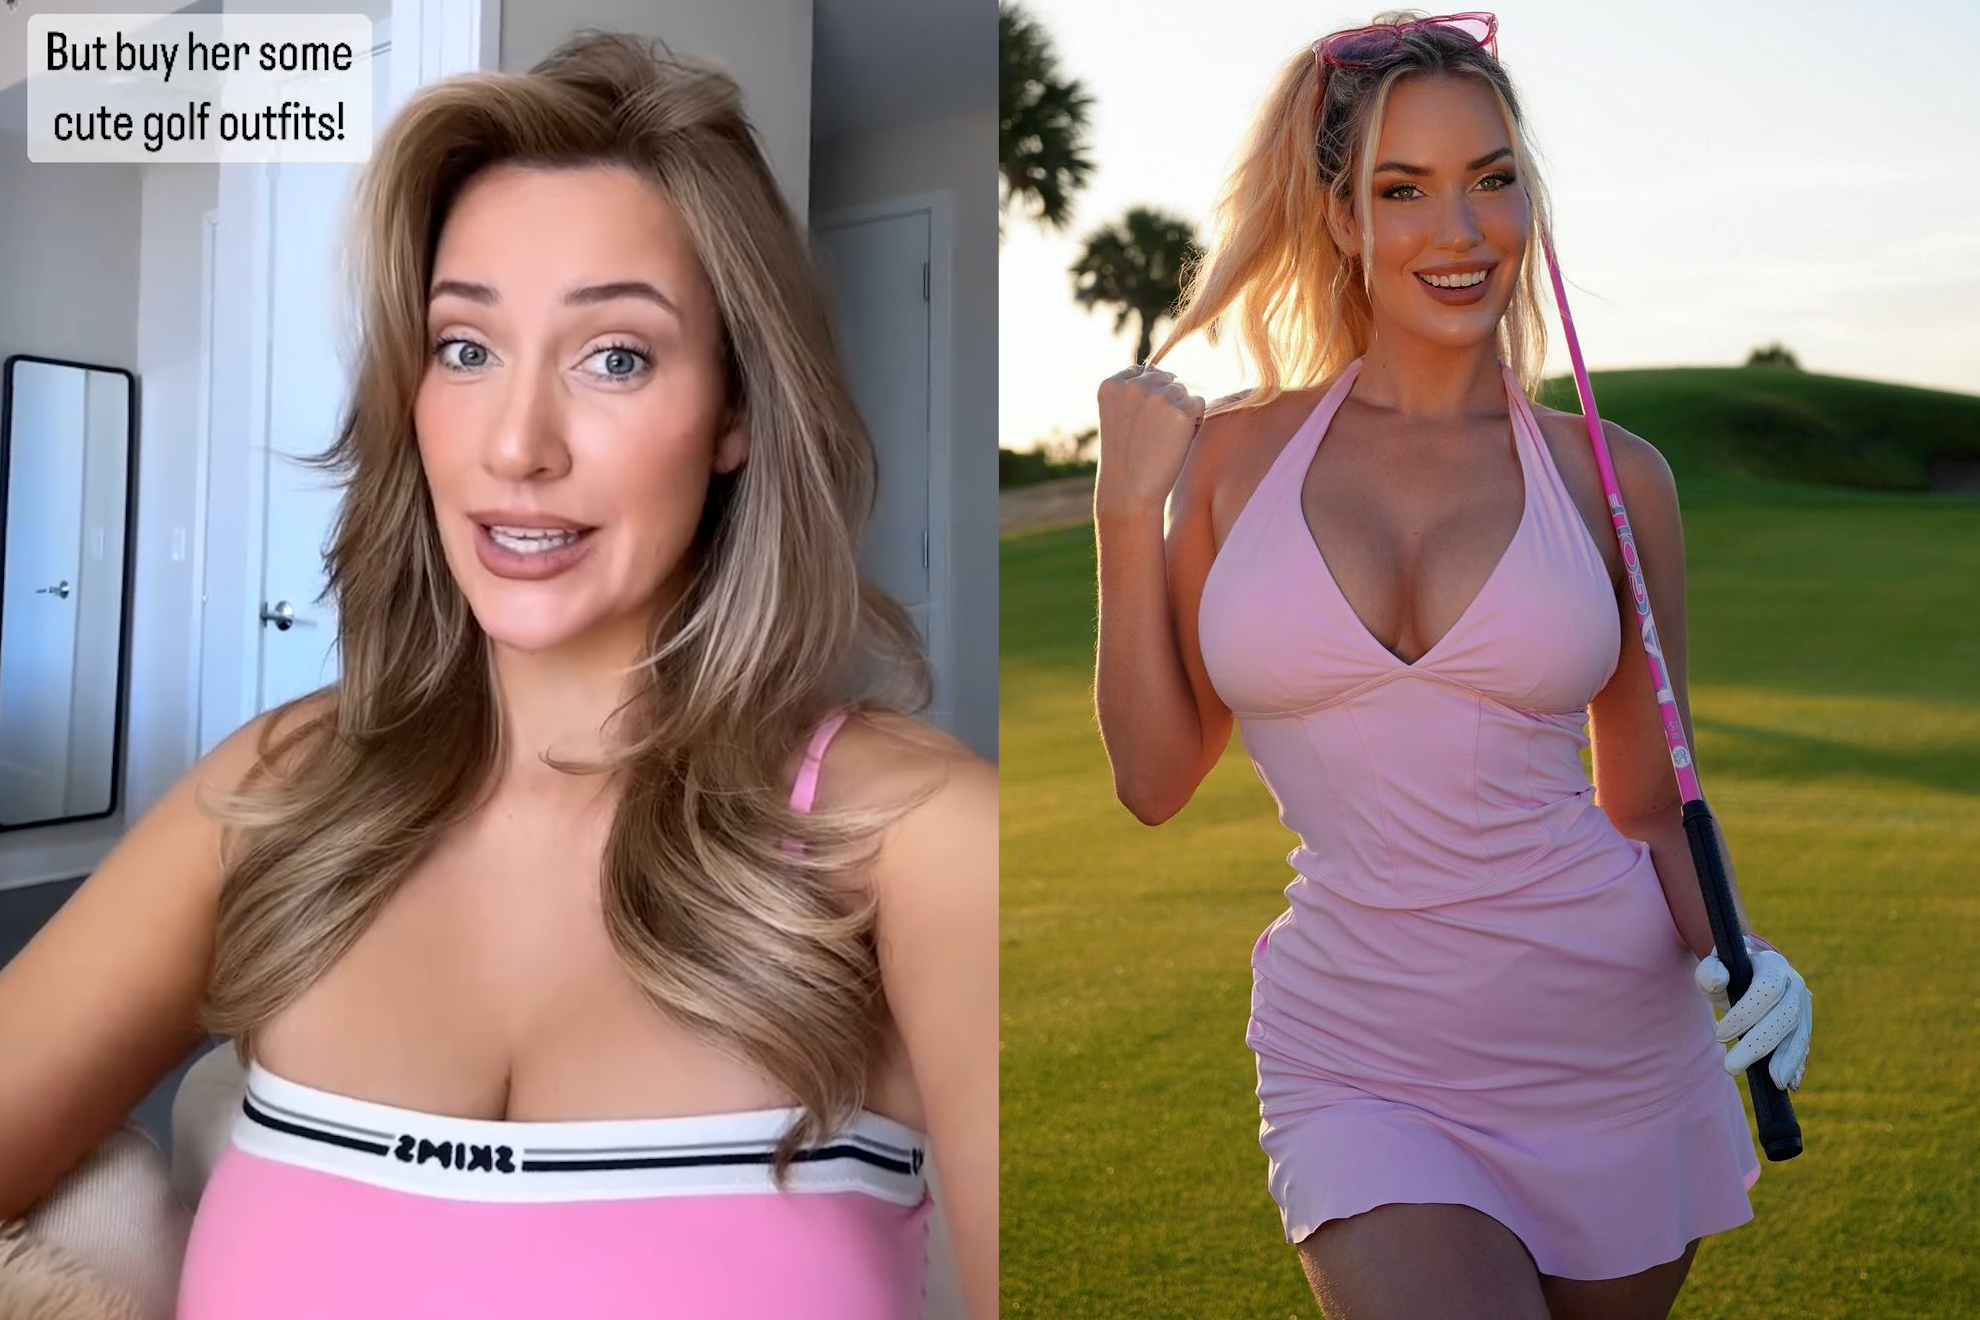 Paige Spiranacs heartfelt advice that helps her fans ease their wives golf frustrations